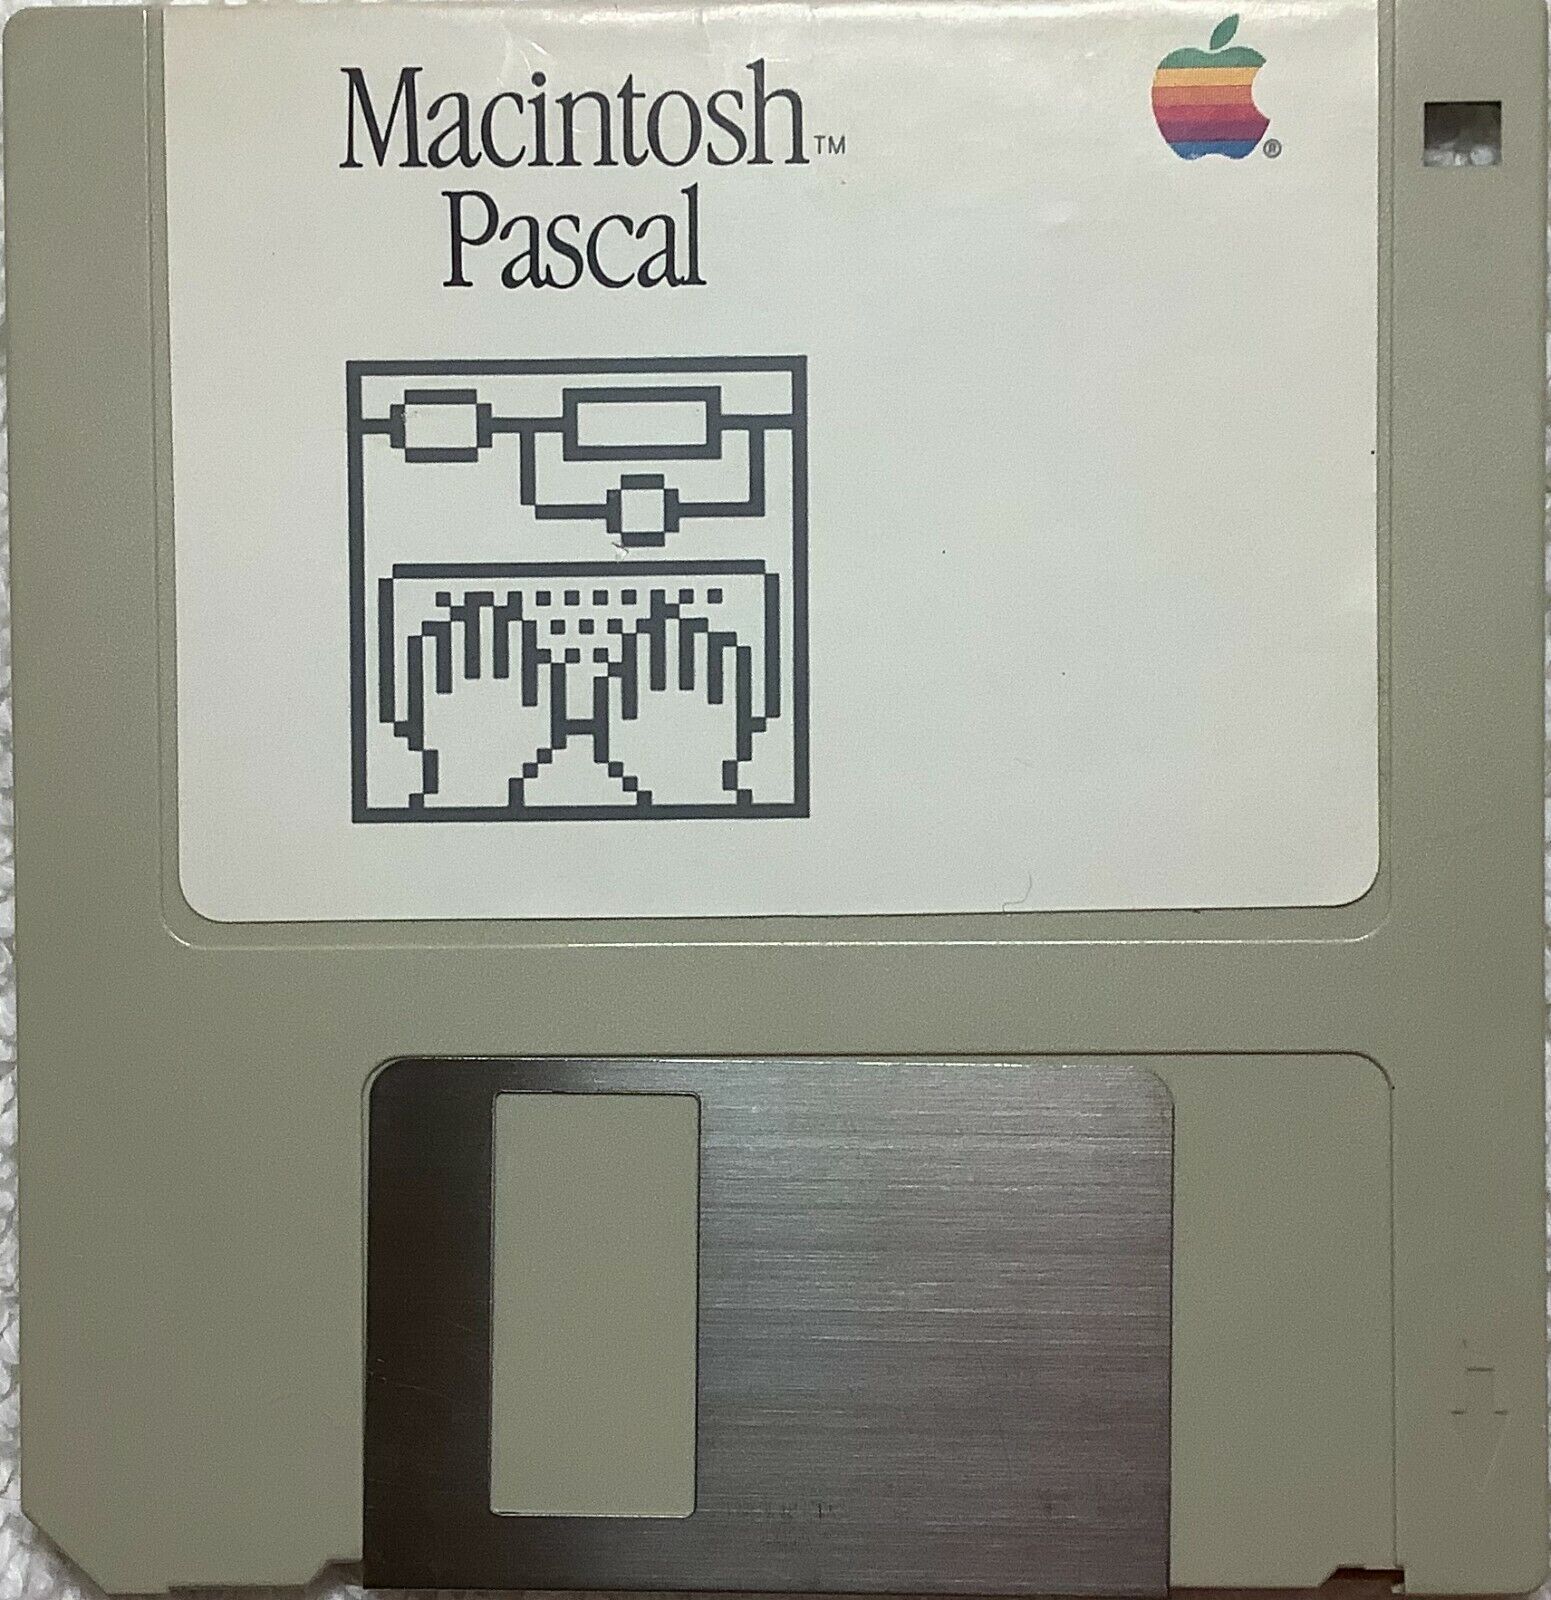 Macintosh Pascal  V. 1.0 - 690-5010-A - Apple Collector's Guide  